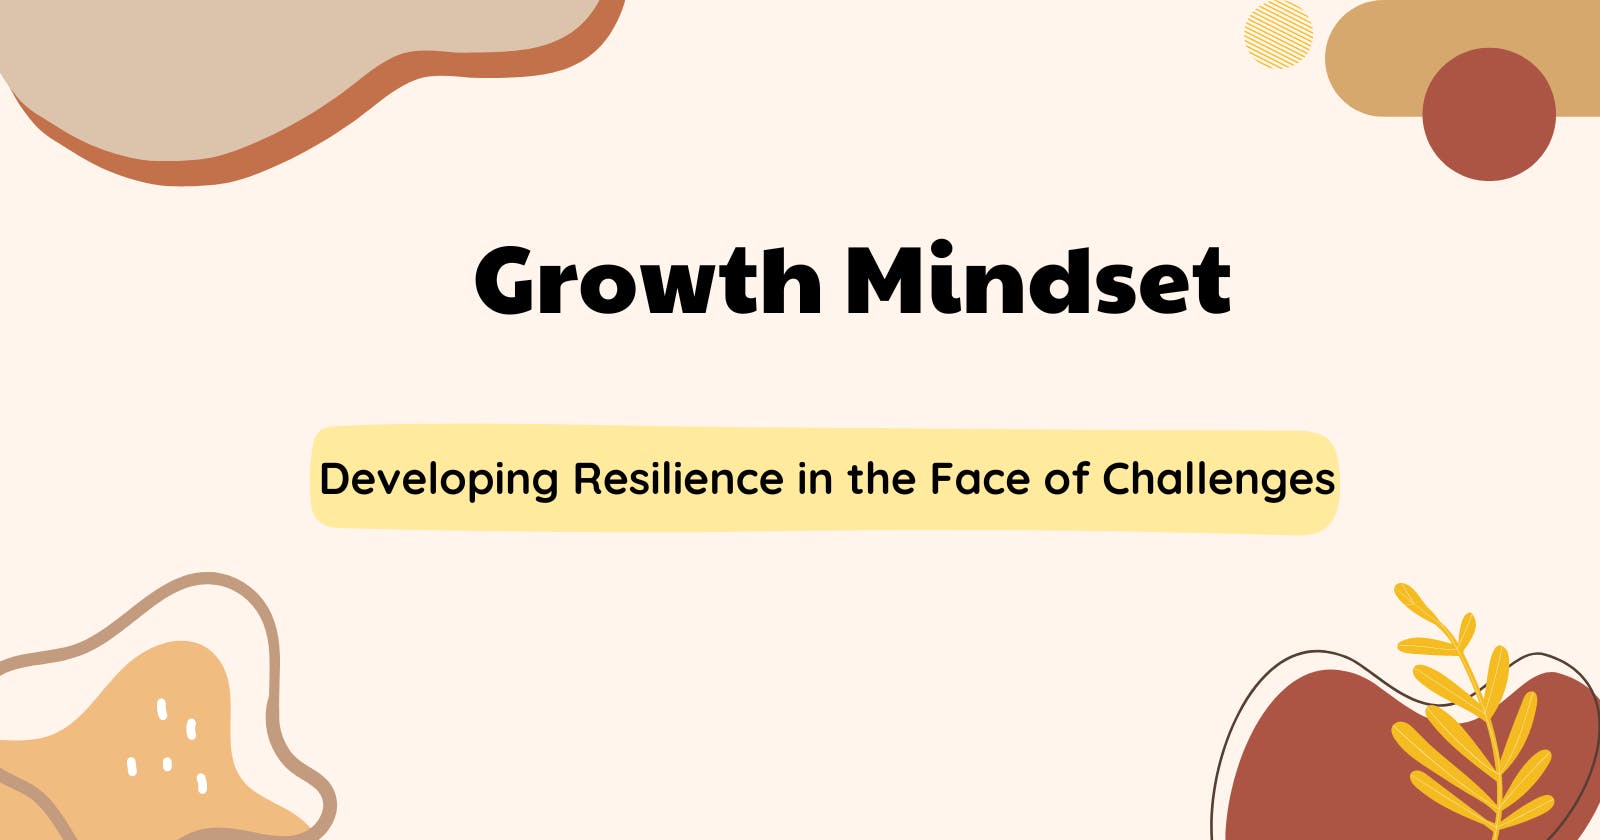 Understanding the Growth Mindset and Developing Resilience in the Face of Challenges 🌱